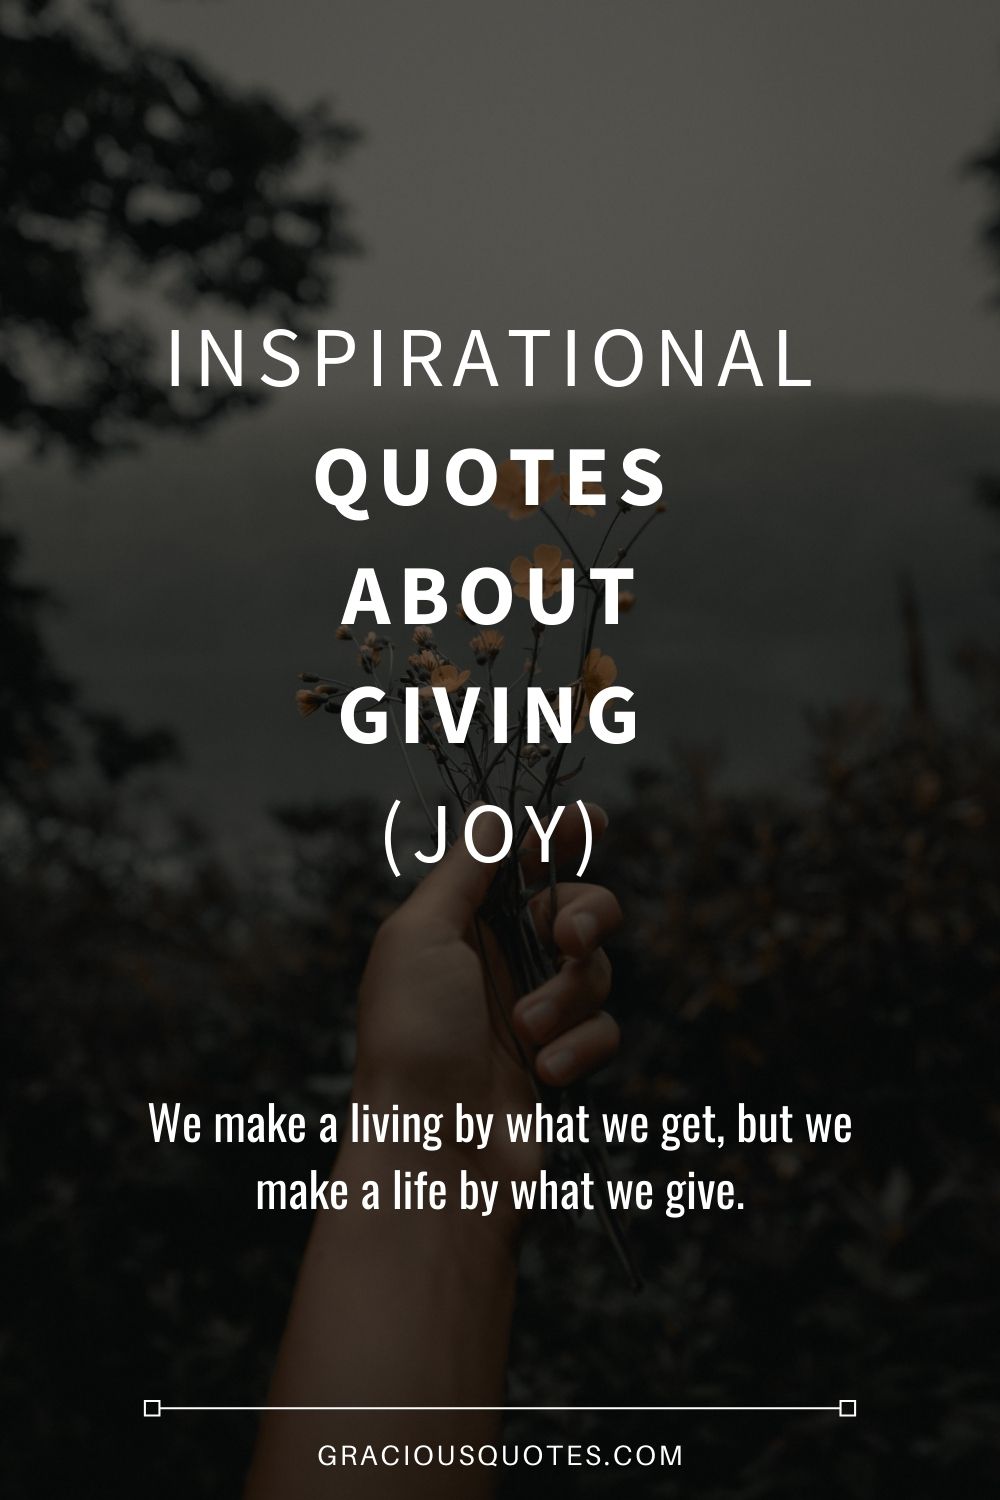 Inspirational Quotes About Giving (JOY) - Gracious Quotes